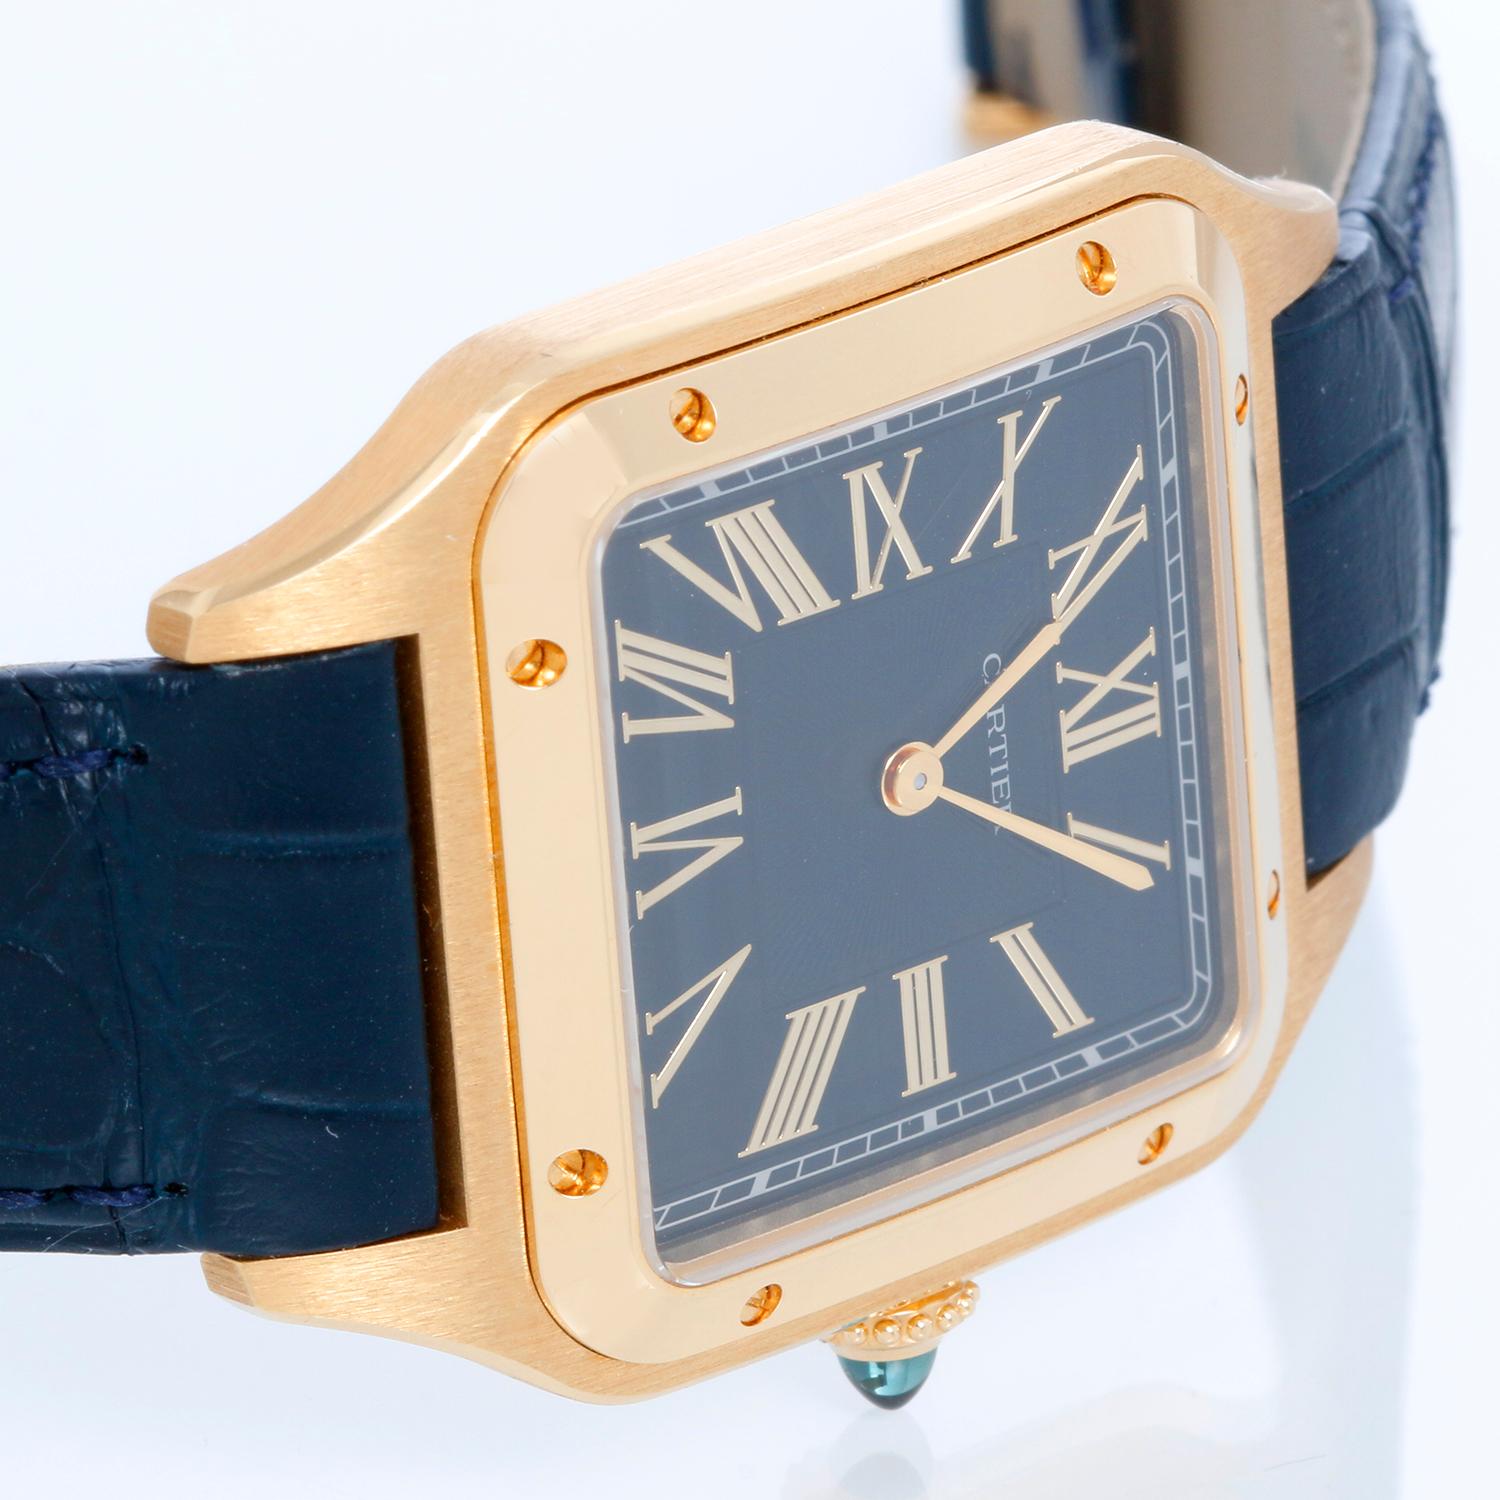 Cartier Santos Dumont 18k Yellow Gold WGSA0077 4532 In Excellent Condition For Sale In Dallas, TX